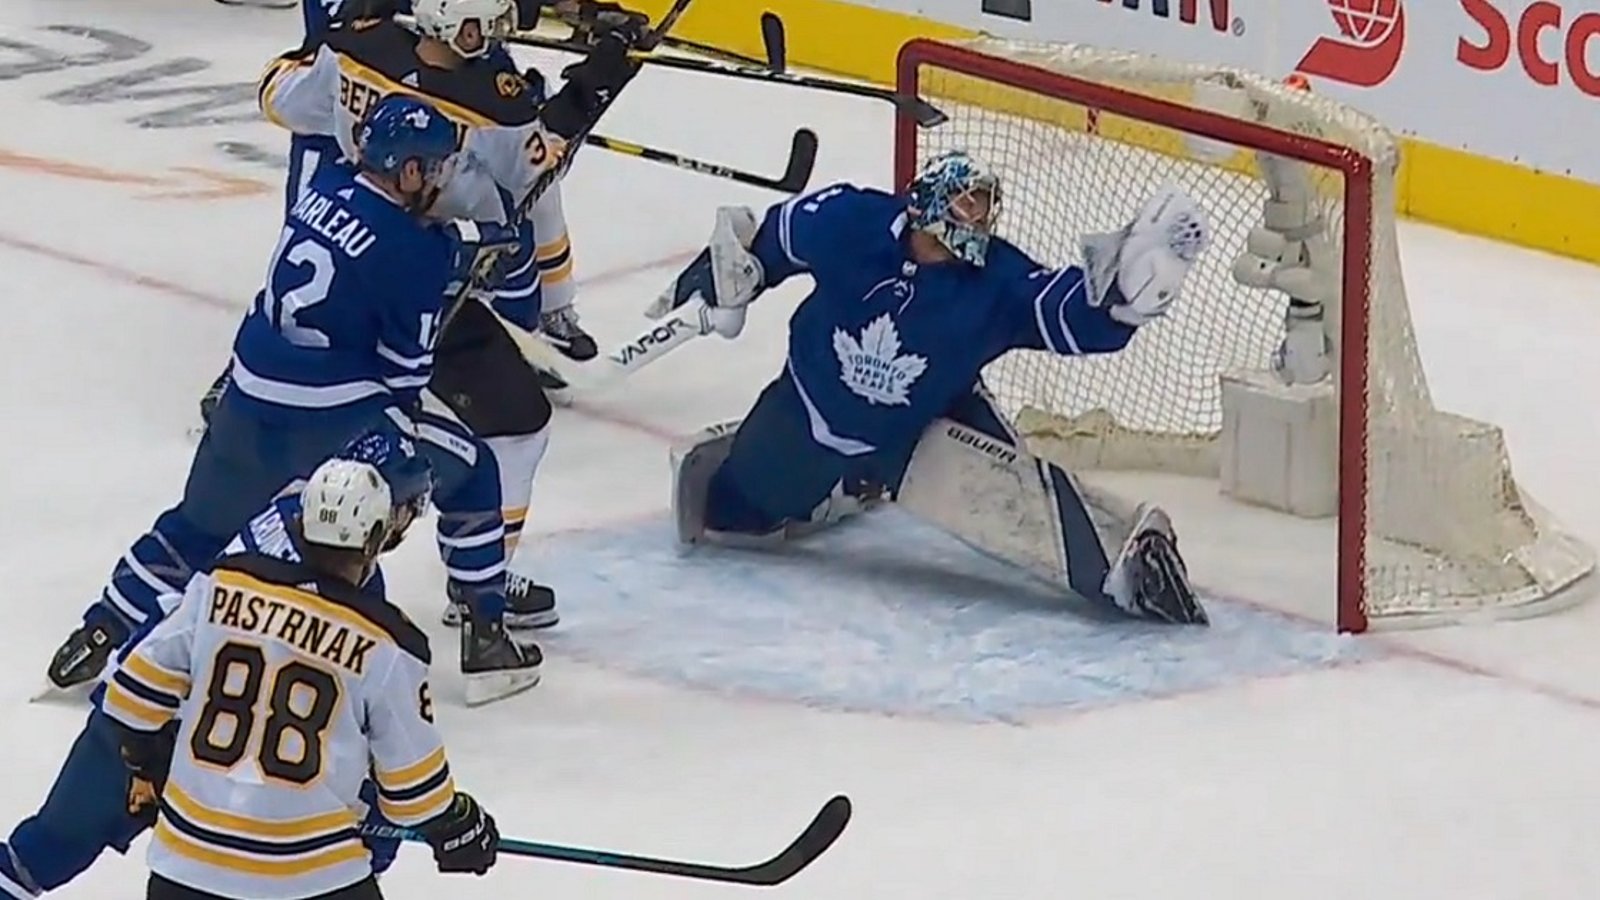 Frederik Anderson shocks Bergeron with one of his best saves of the year!